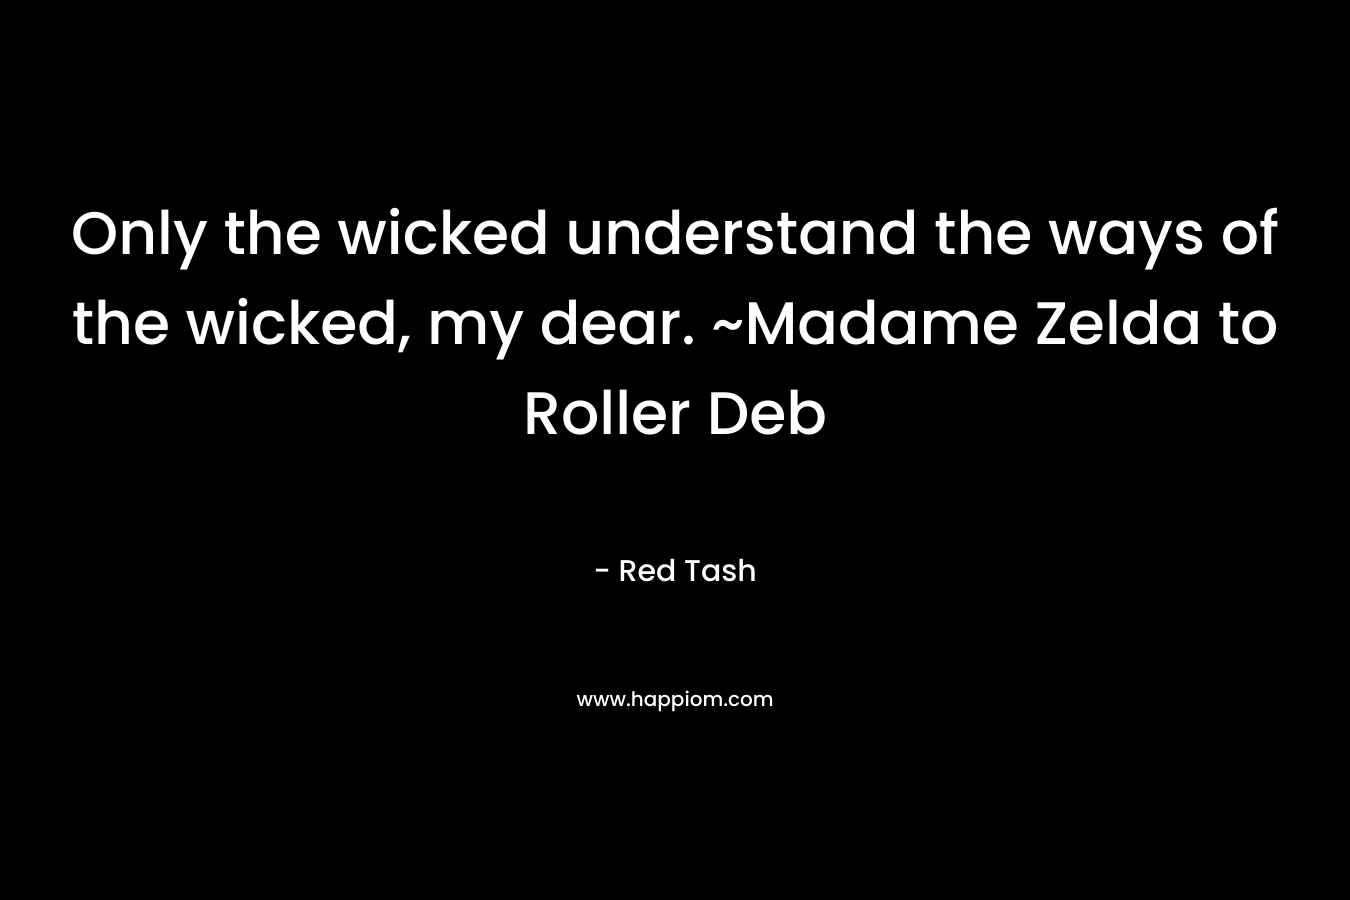 Only the wicked understand the ways of the wicked, my dear. ~Madame Zelda to Roller Deb